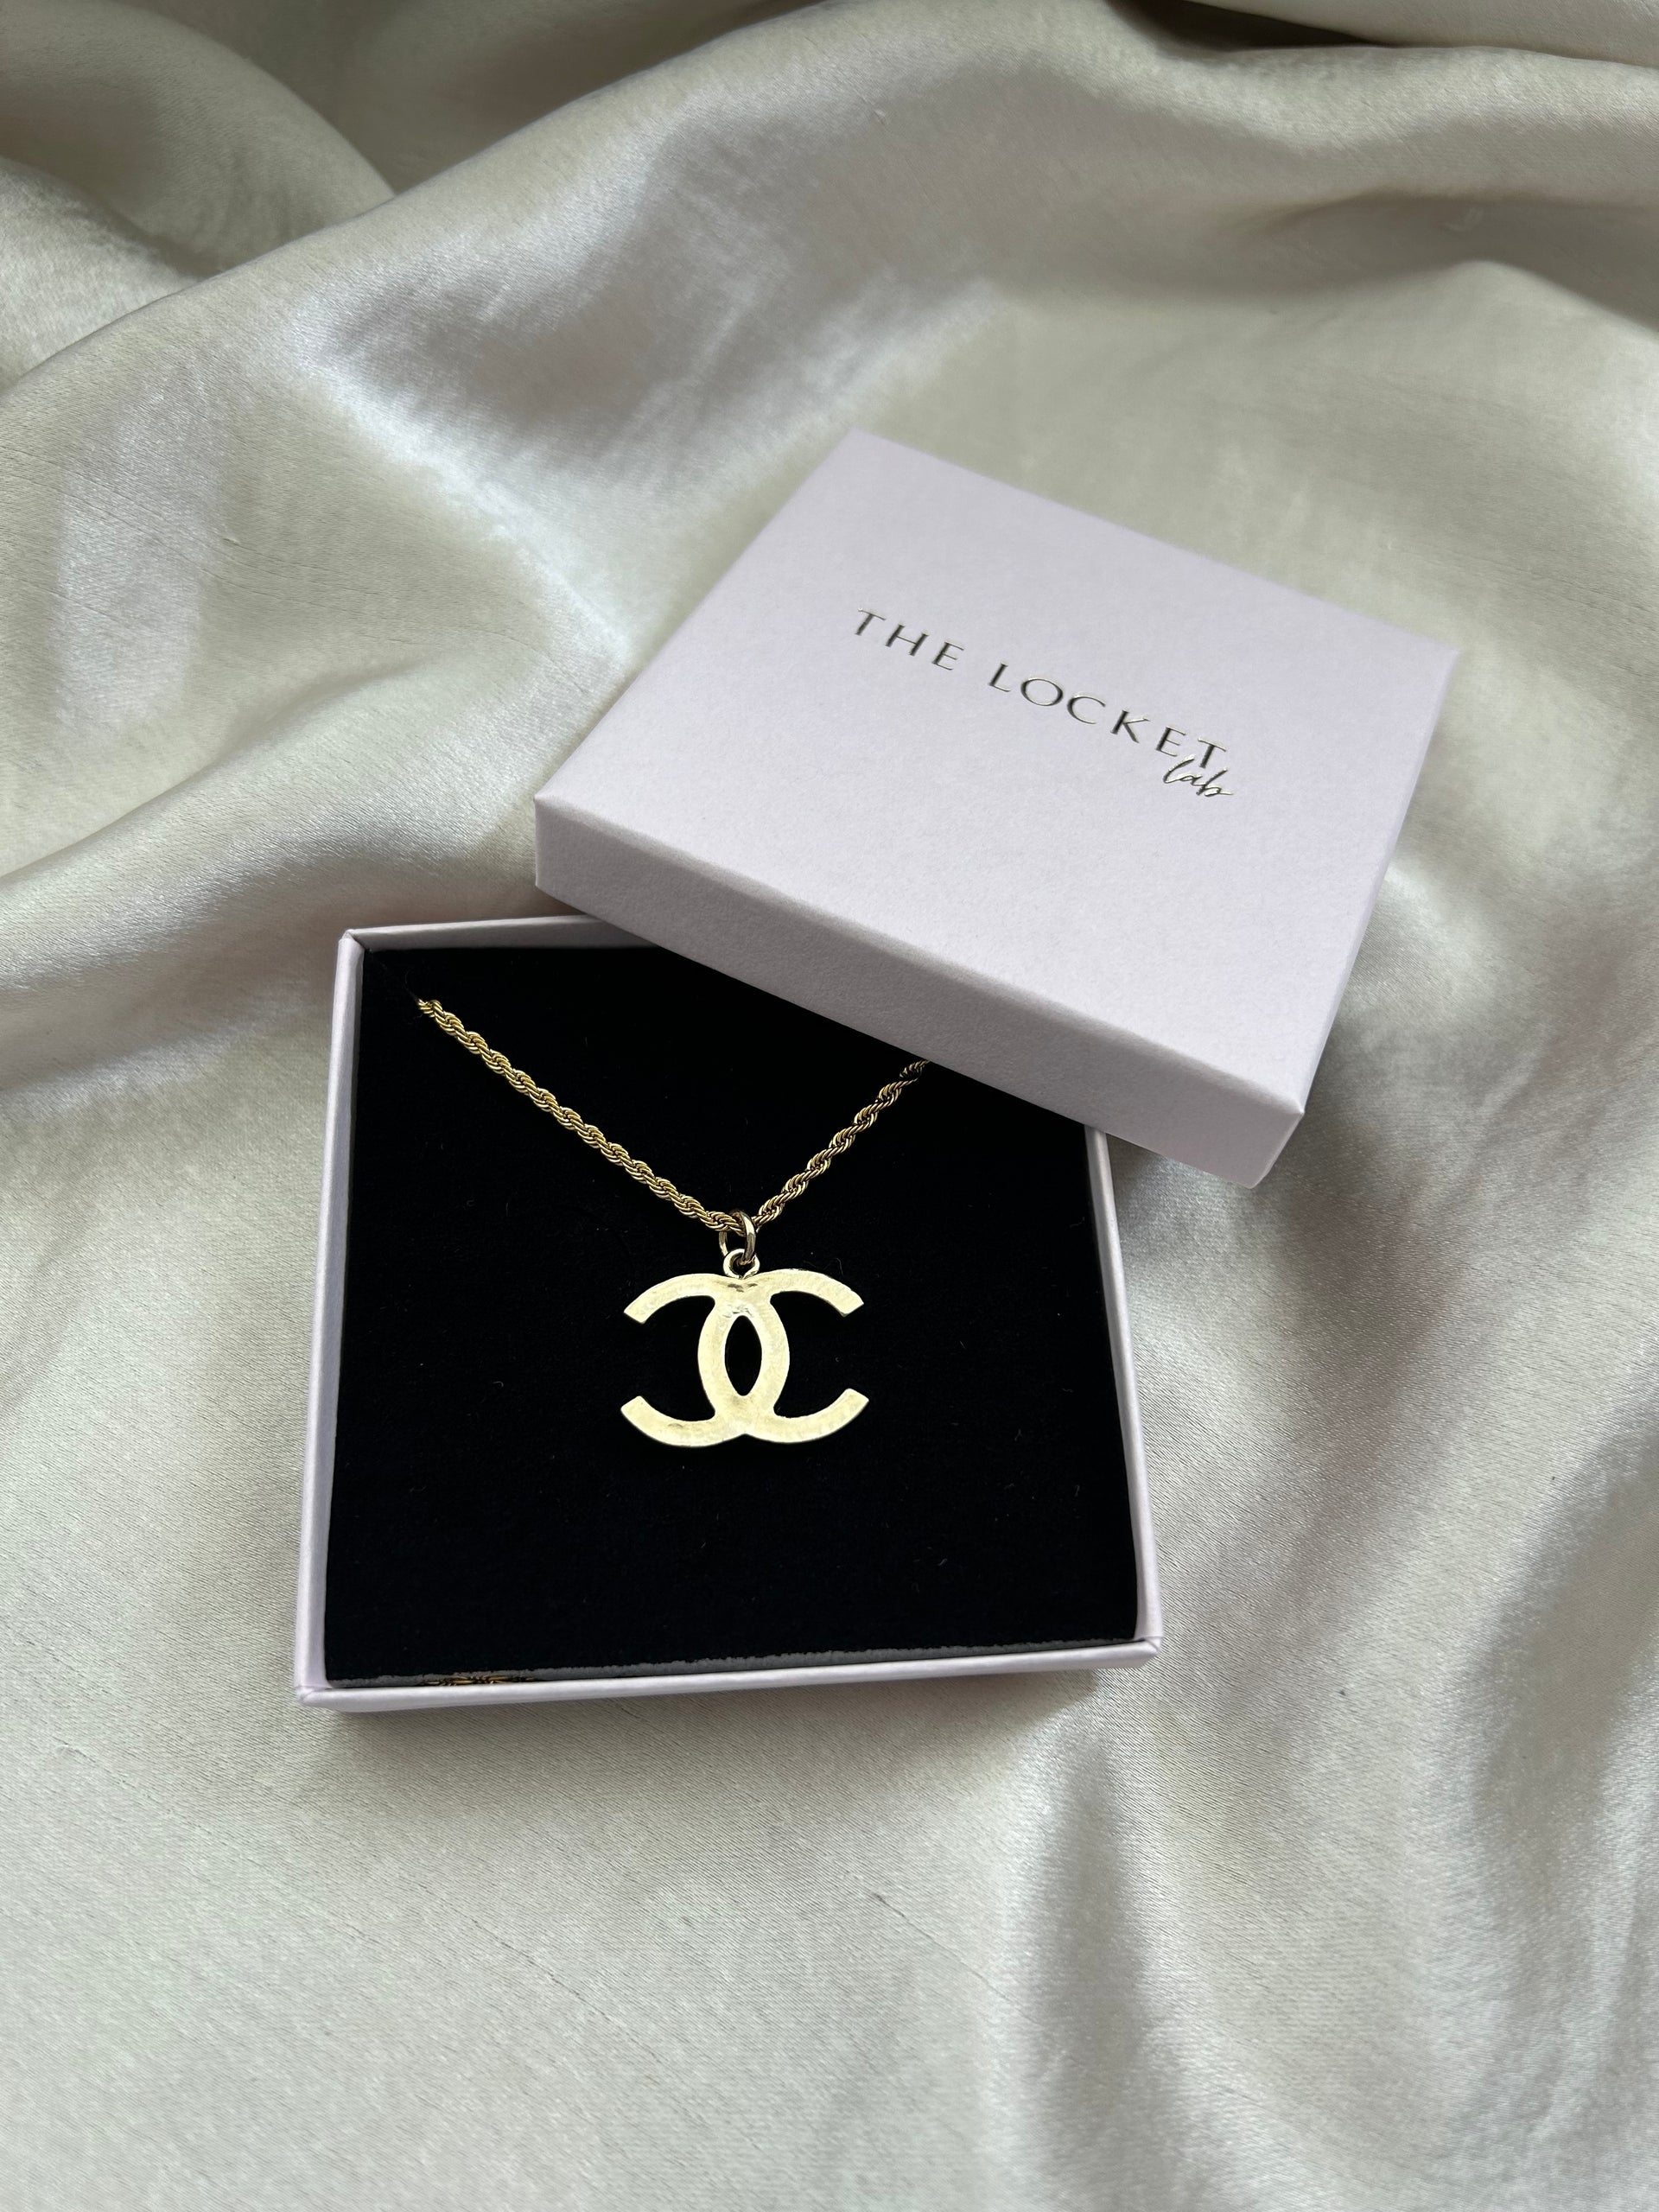 CHANEL CC Necklace - Fashion Jewelry Certified Authentic